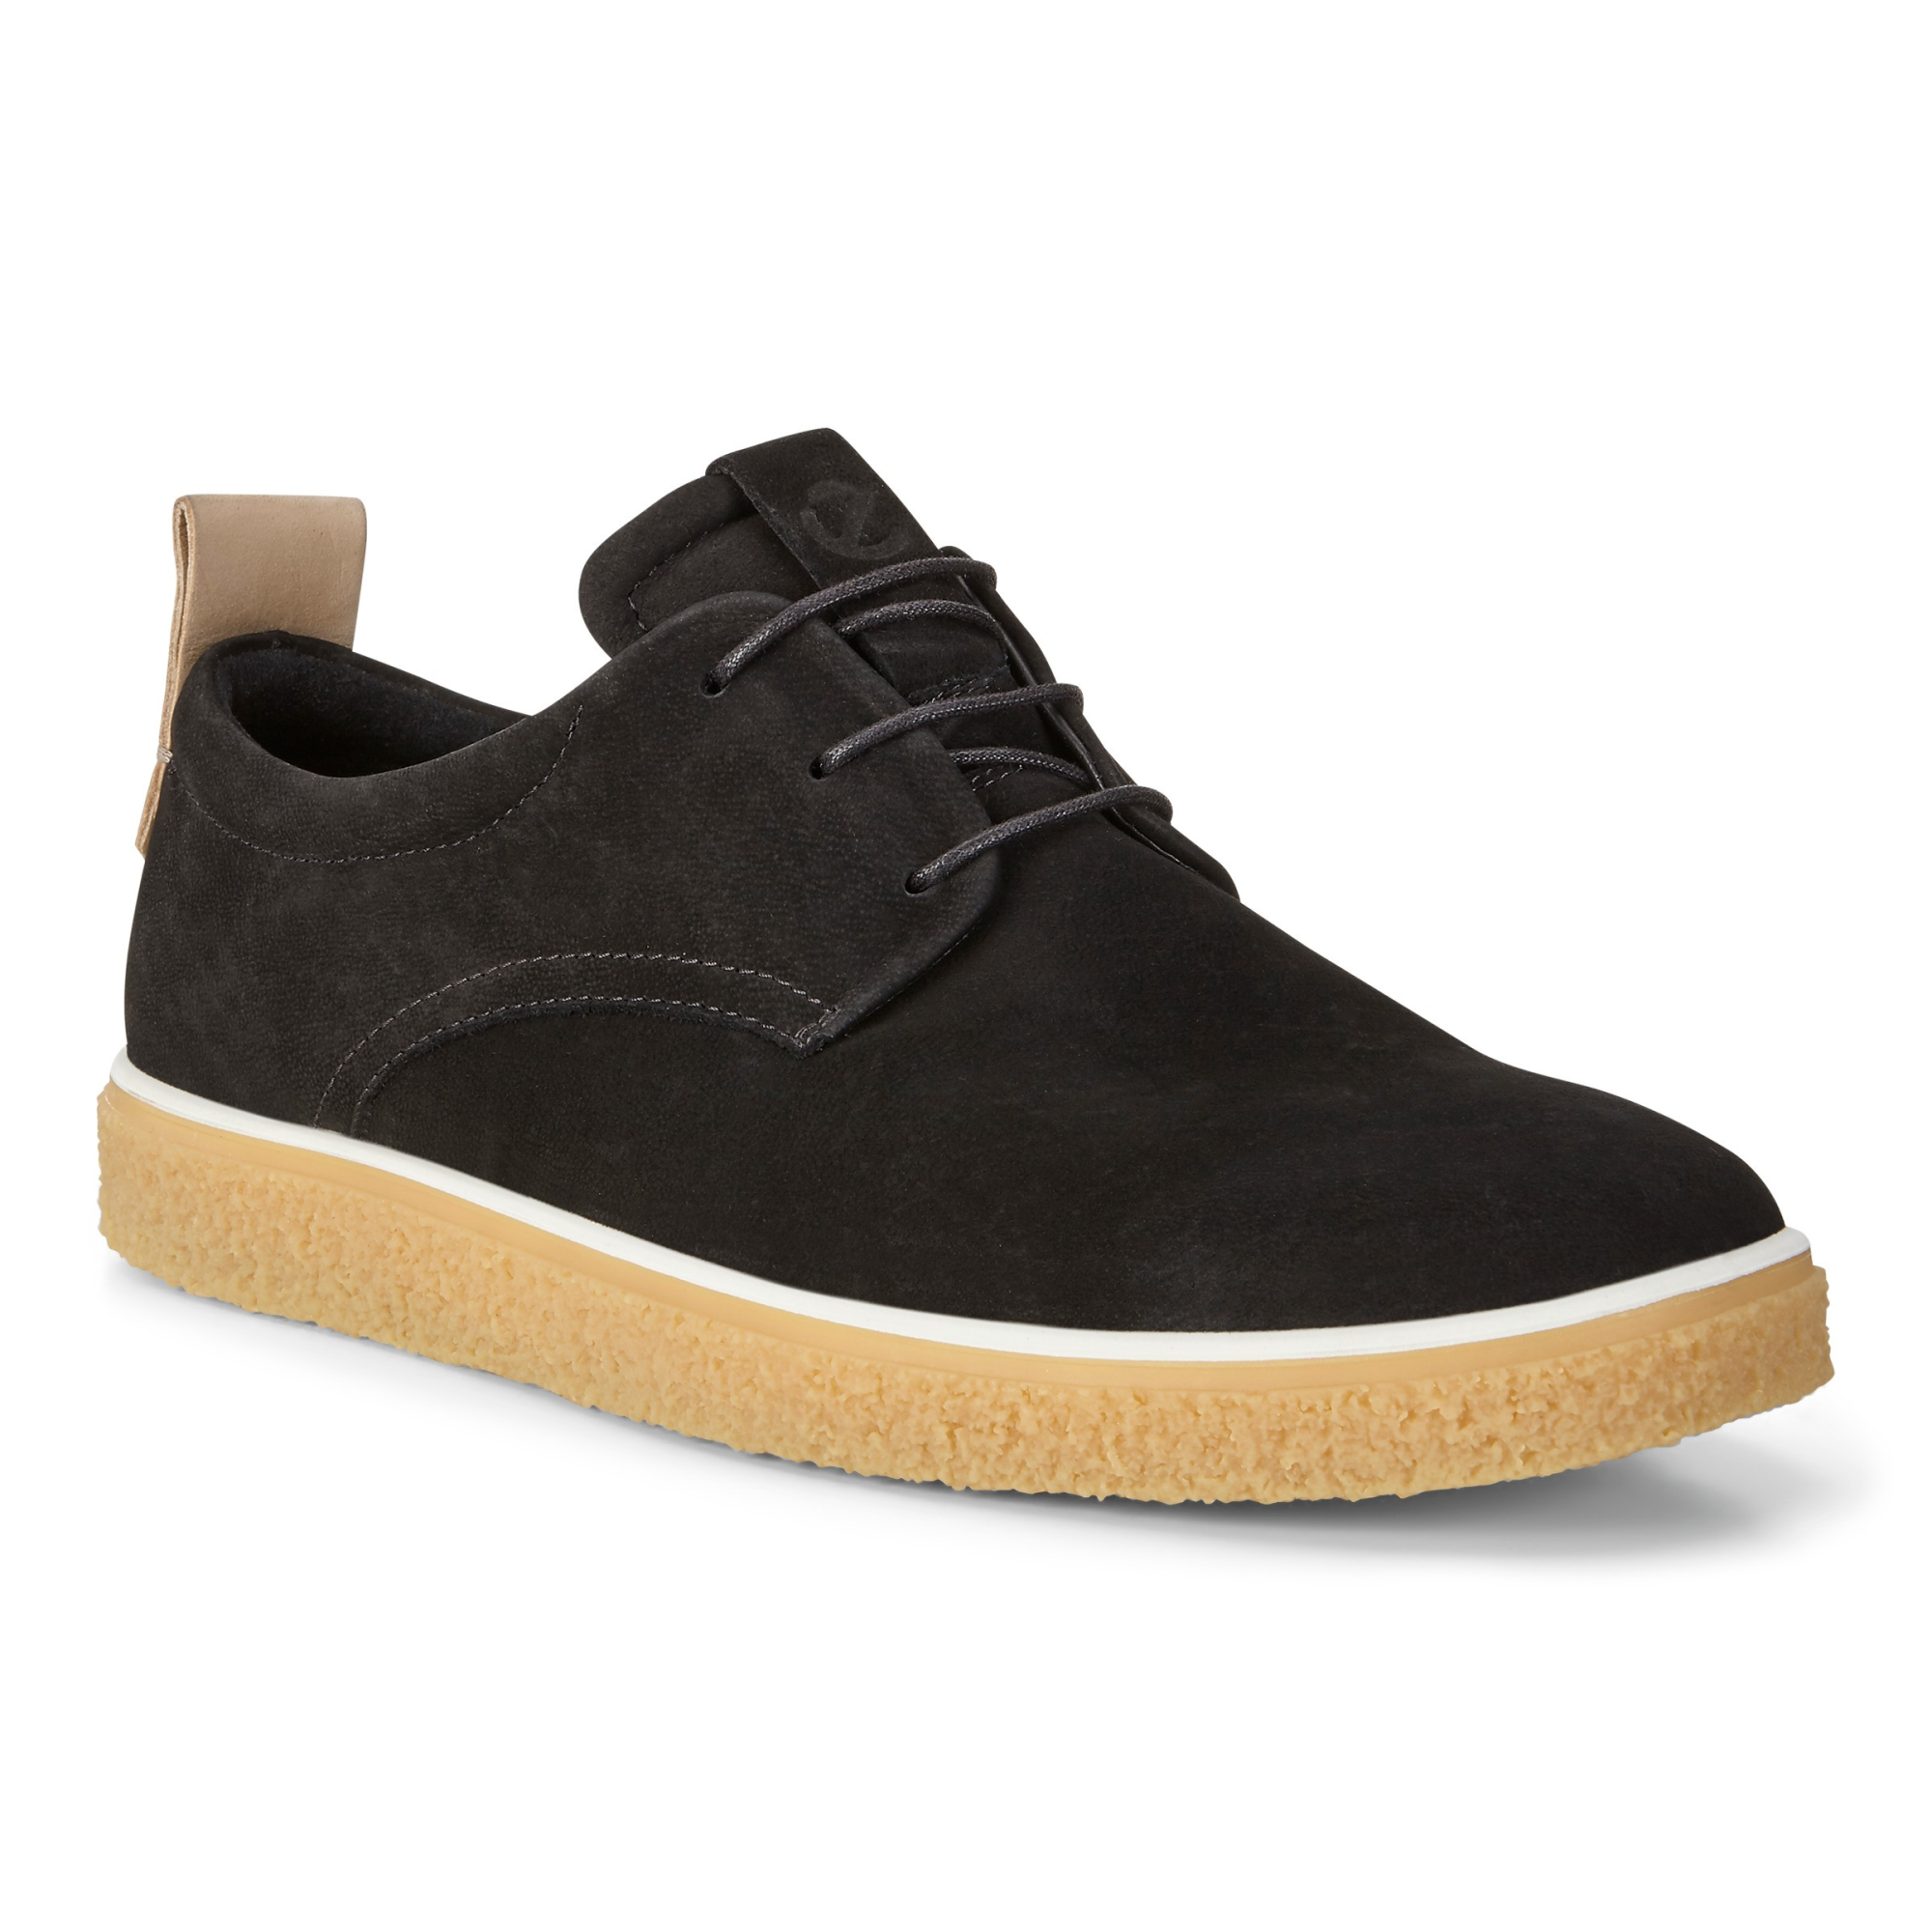 Ecco Mens Derby 45 - Products - Veryk Mall - Veryk Mall, many product, quick response, safe money!